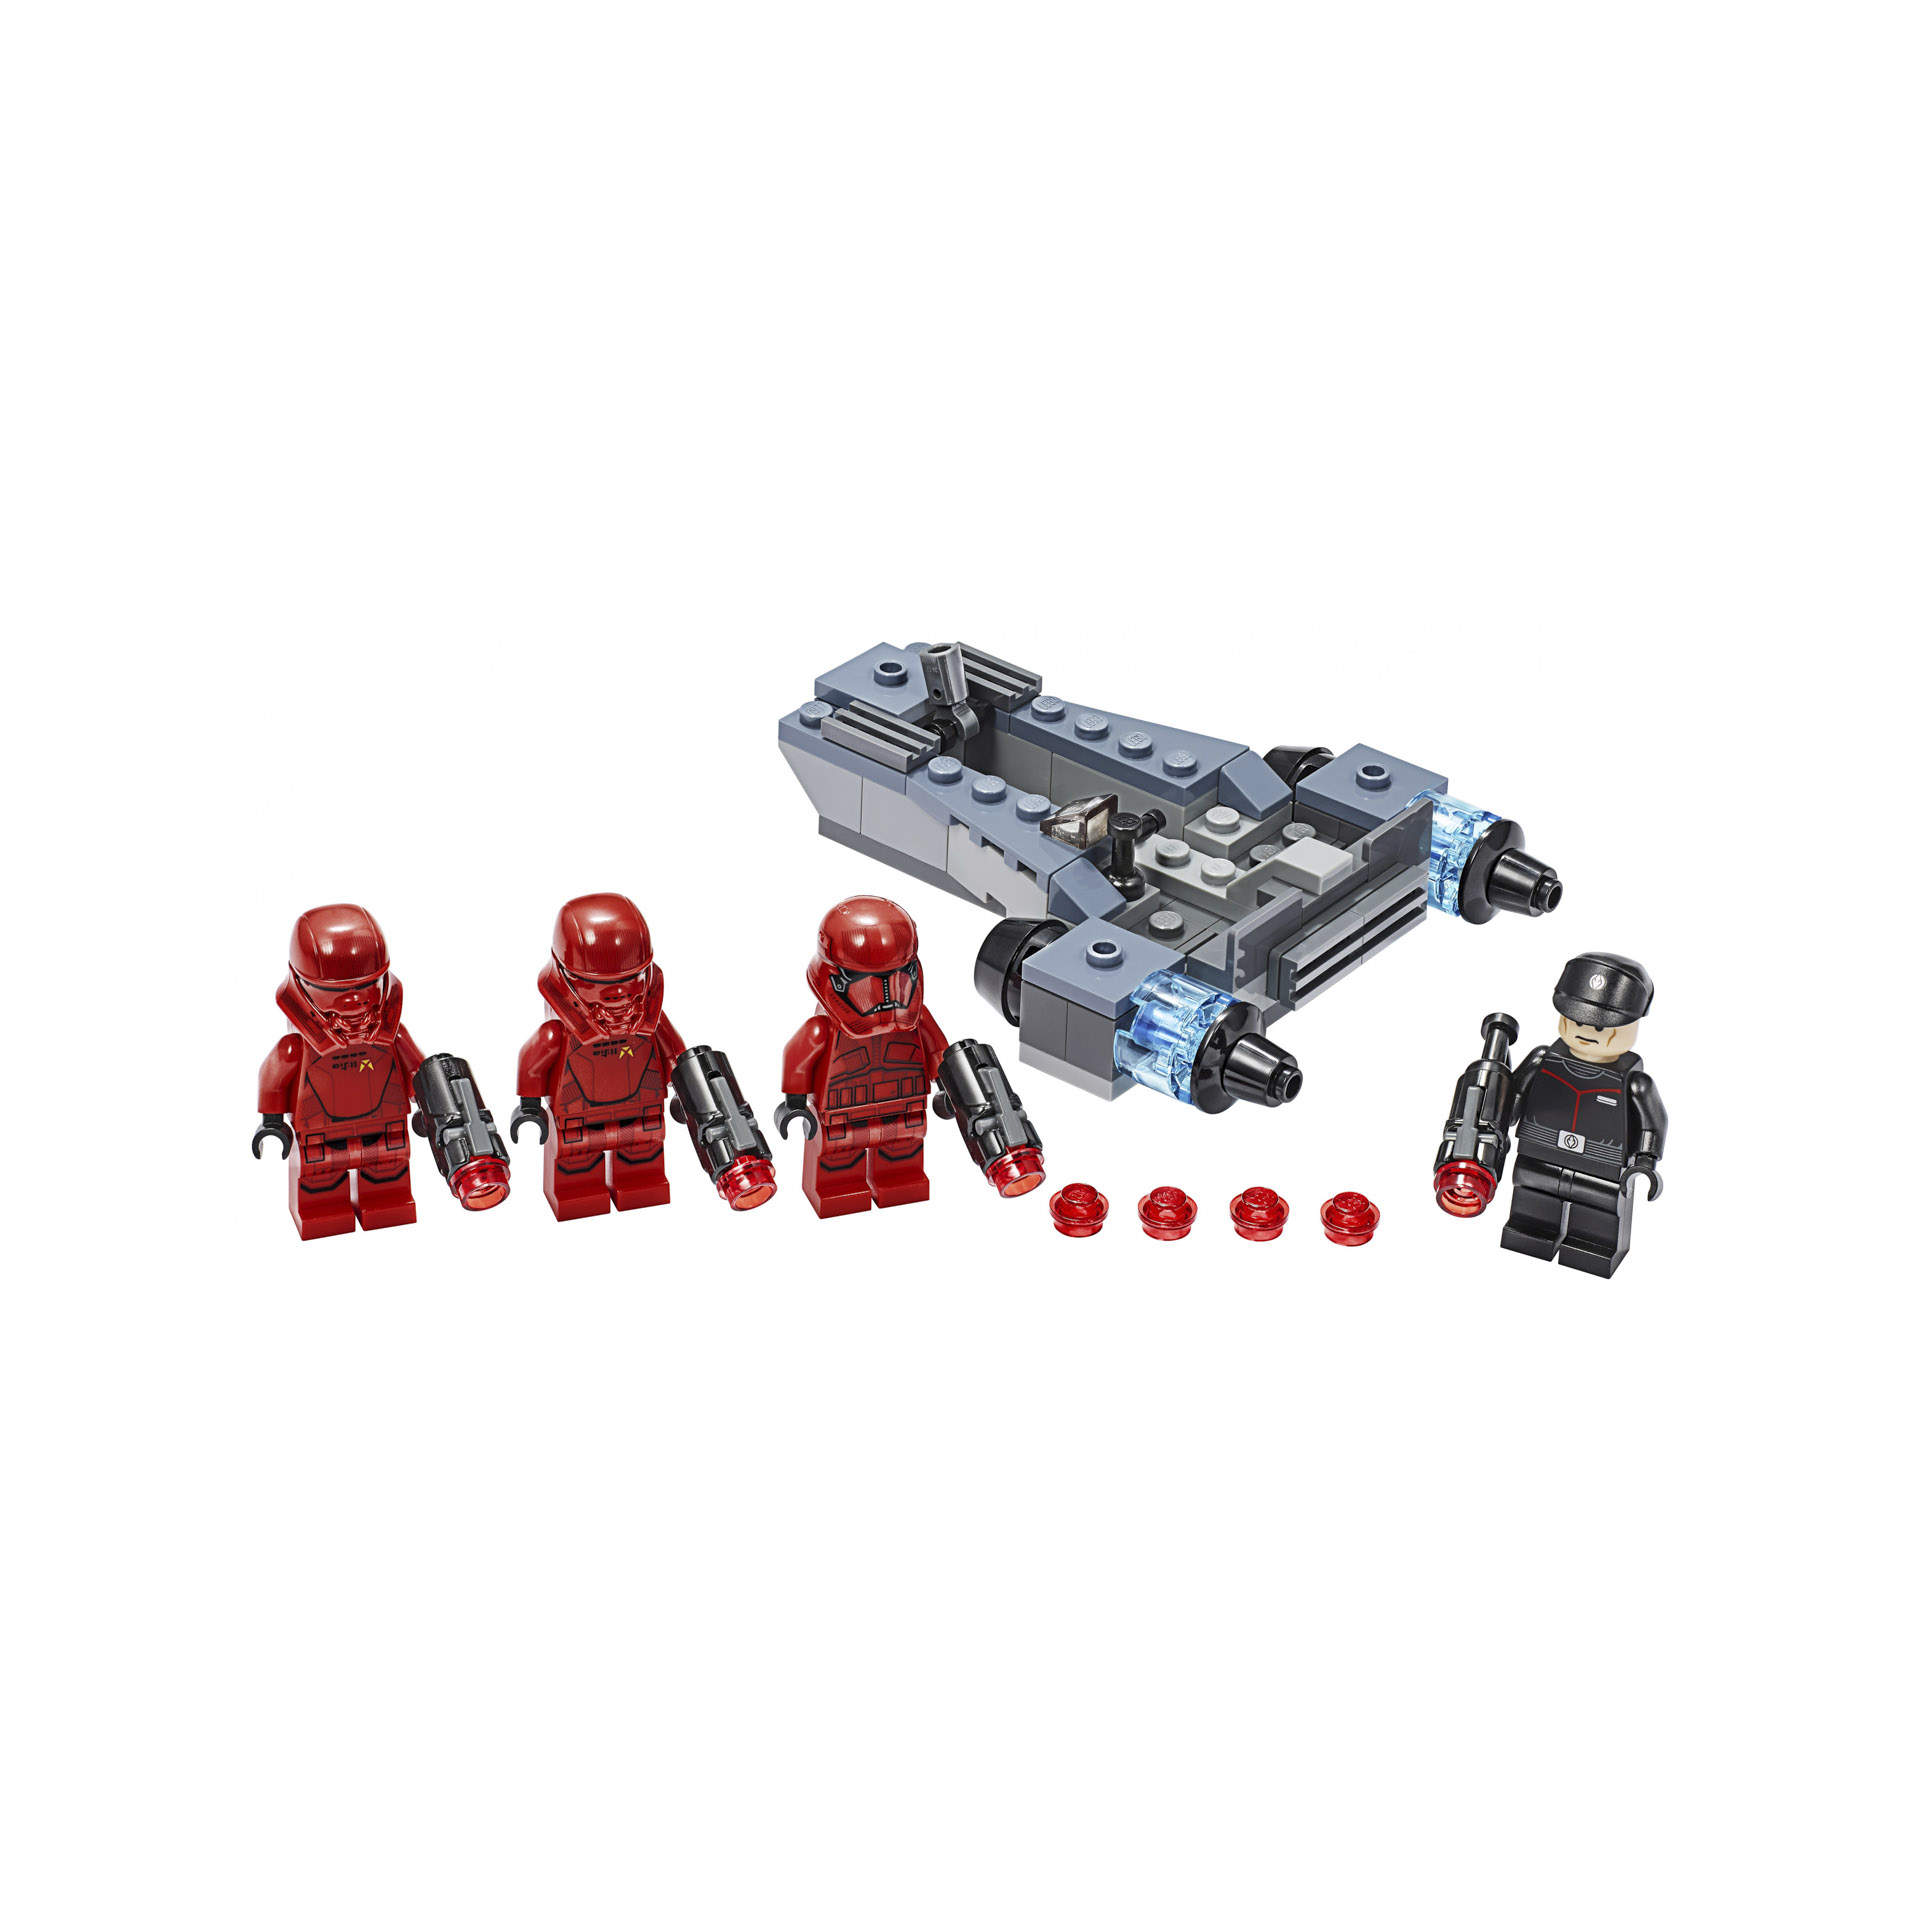 Battle Pack Sith Troopers 75266, , large